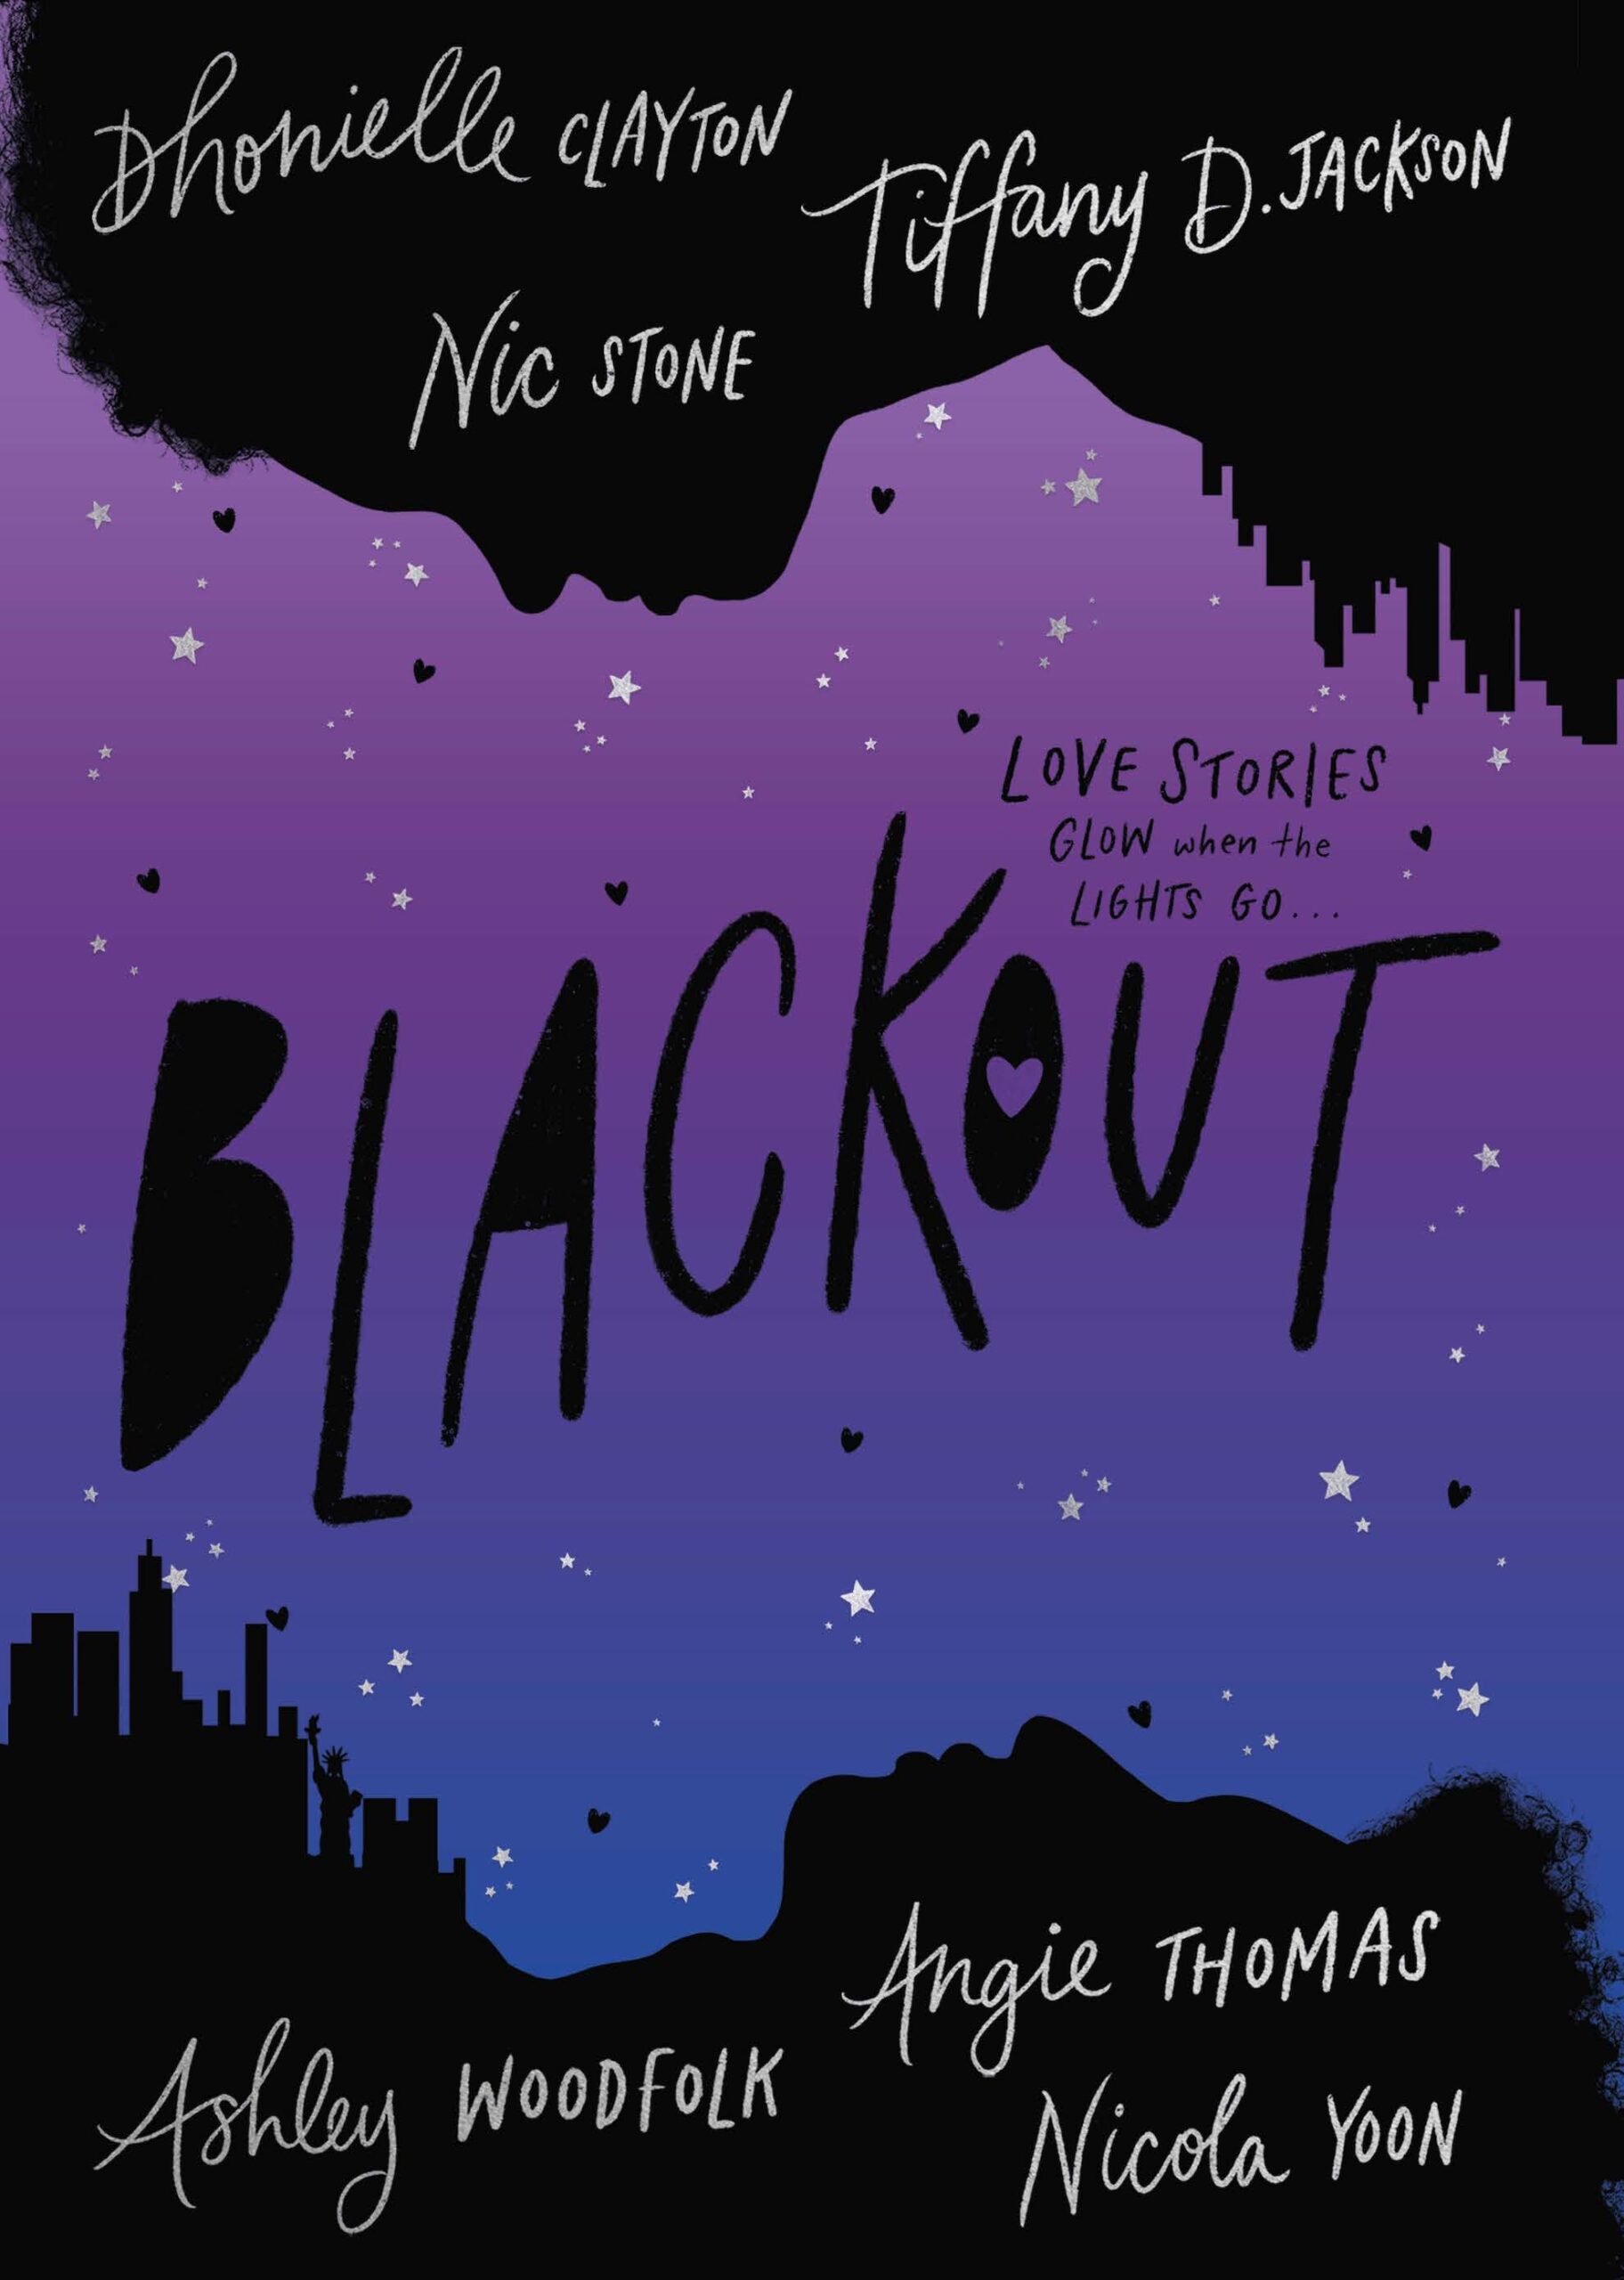 Print your own Blackout Poster - 